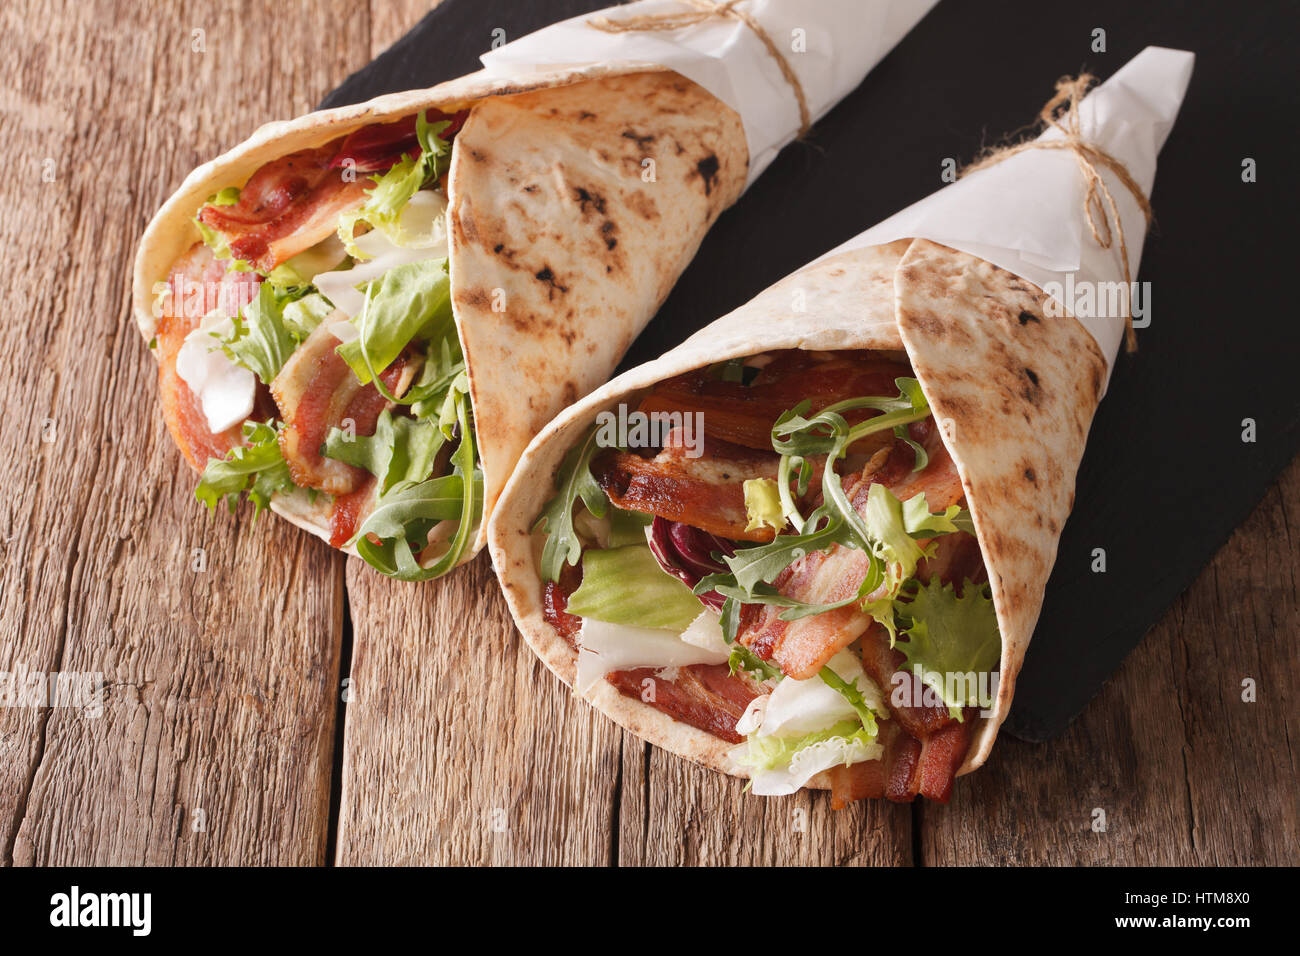 Fried bacon and salad wrapped in pita bread close-up on a table. horizontal Stock Photo